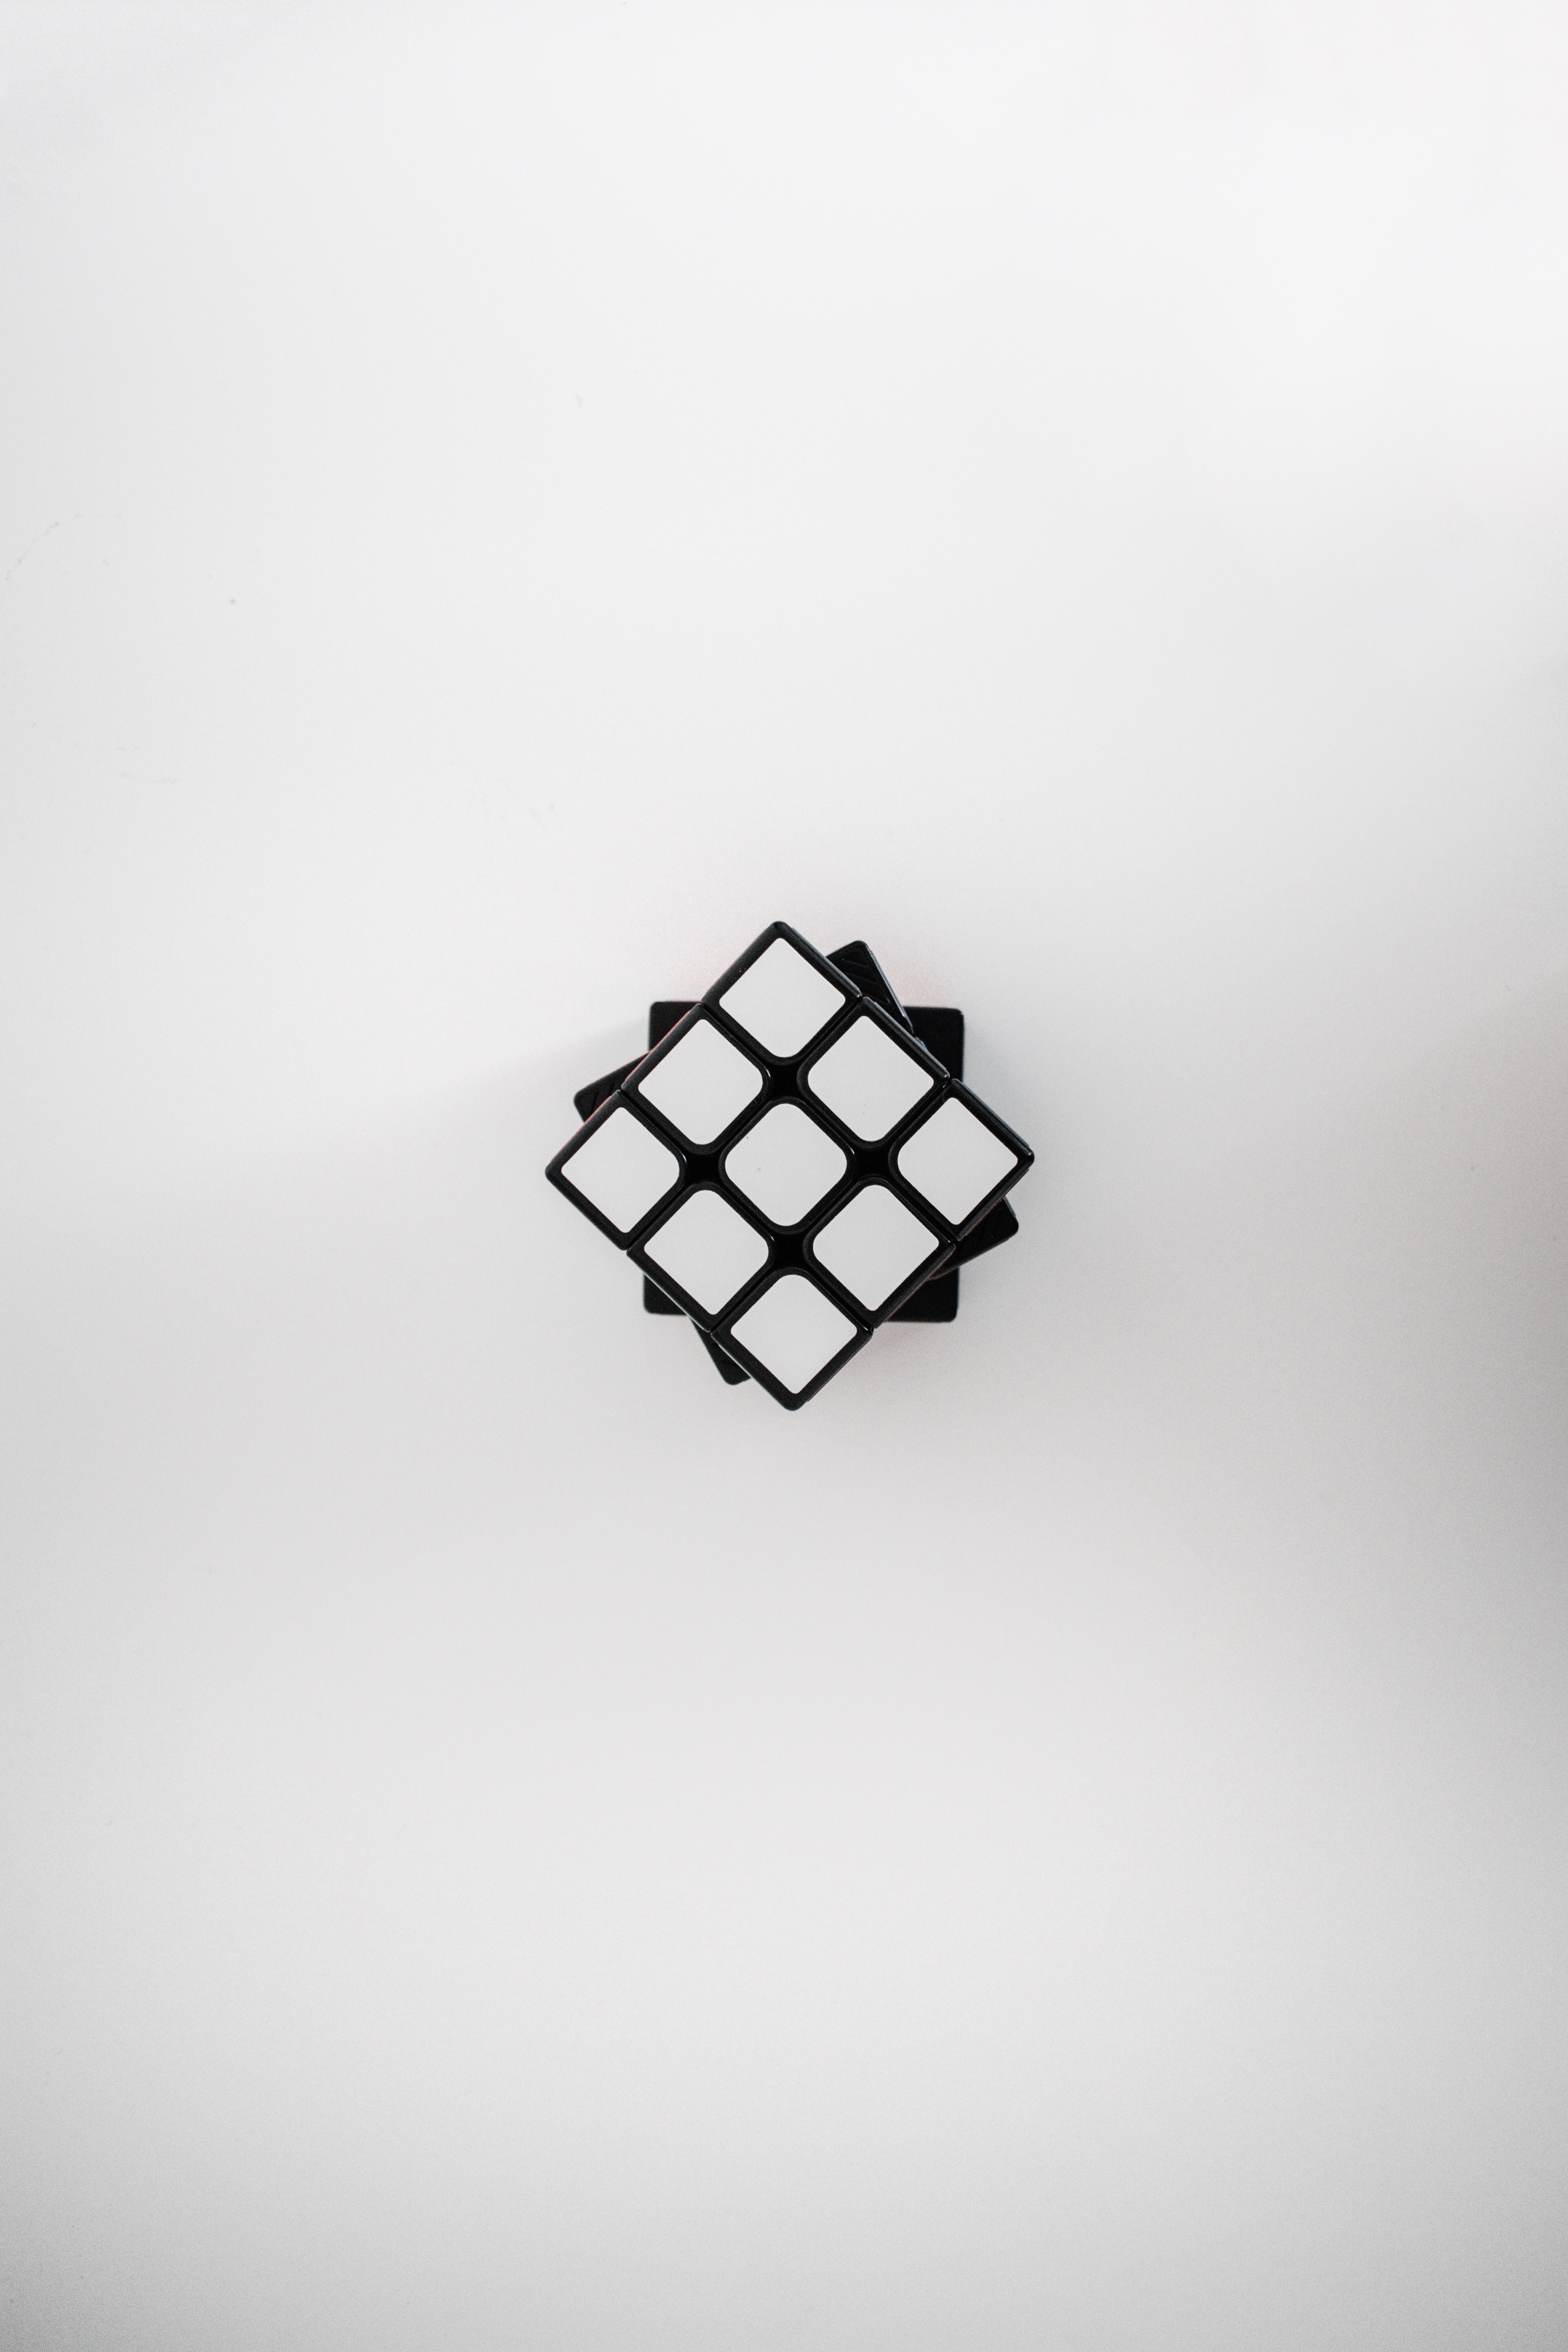 rubik's cube, miscellanea, cube, white, view from above, miscellaneous